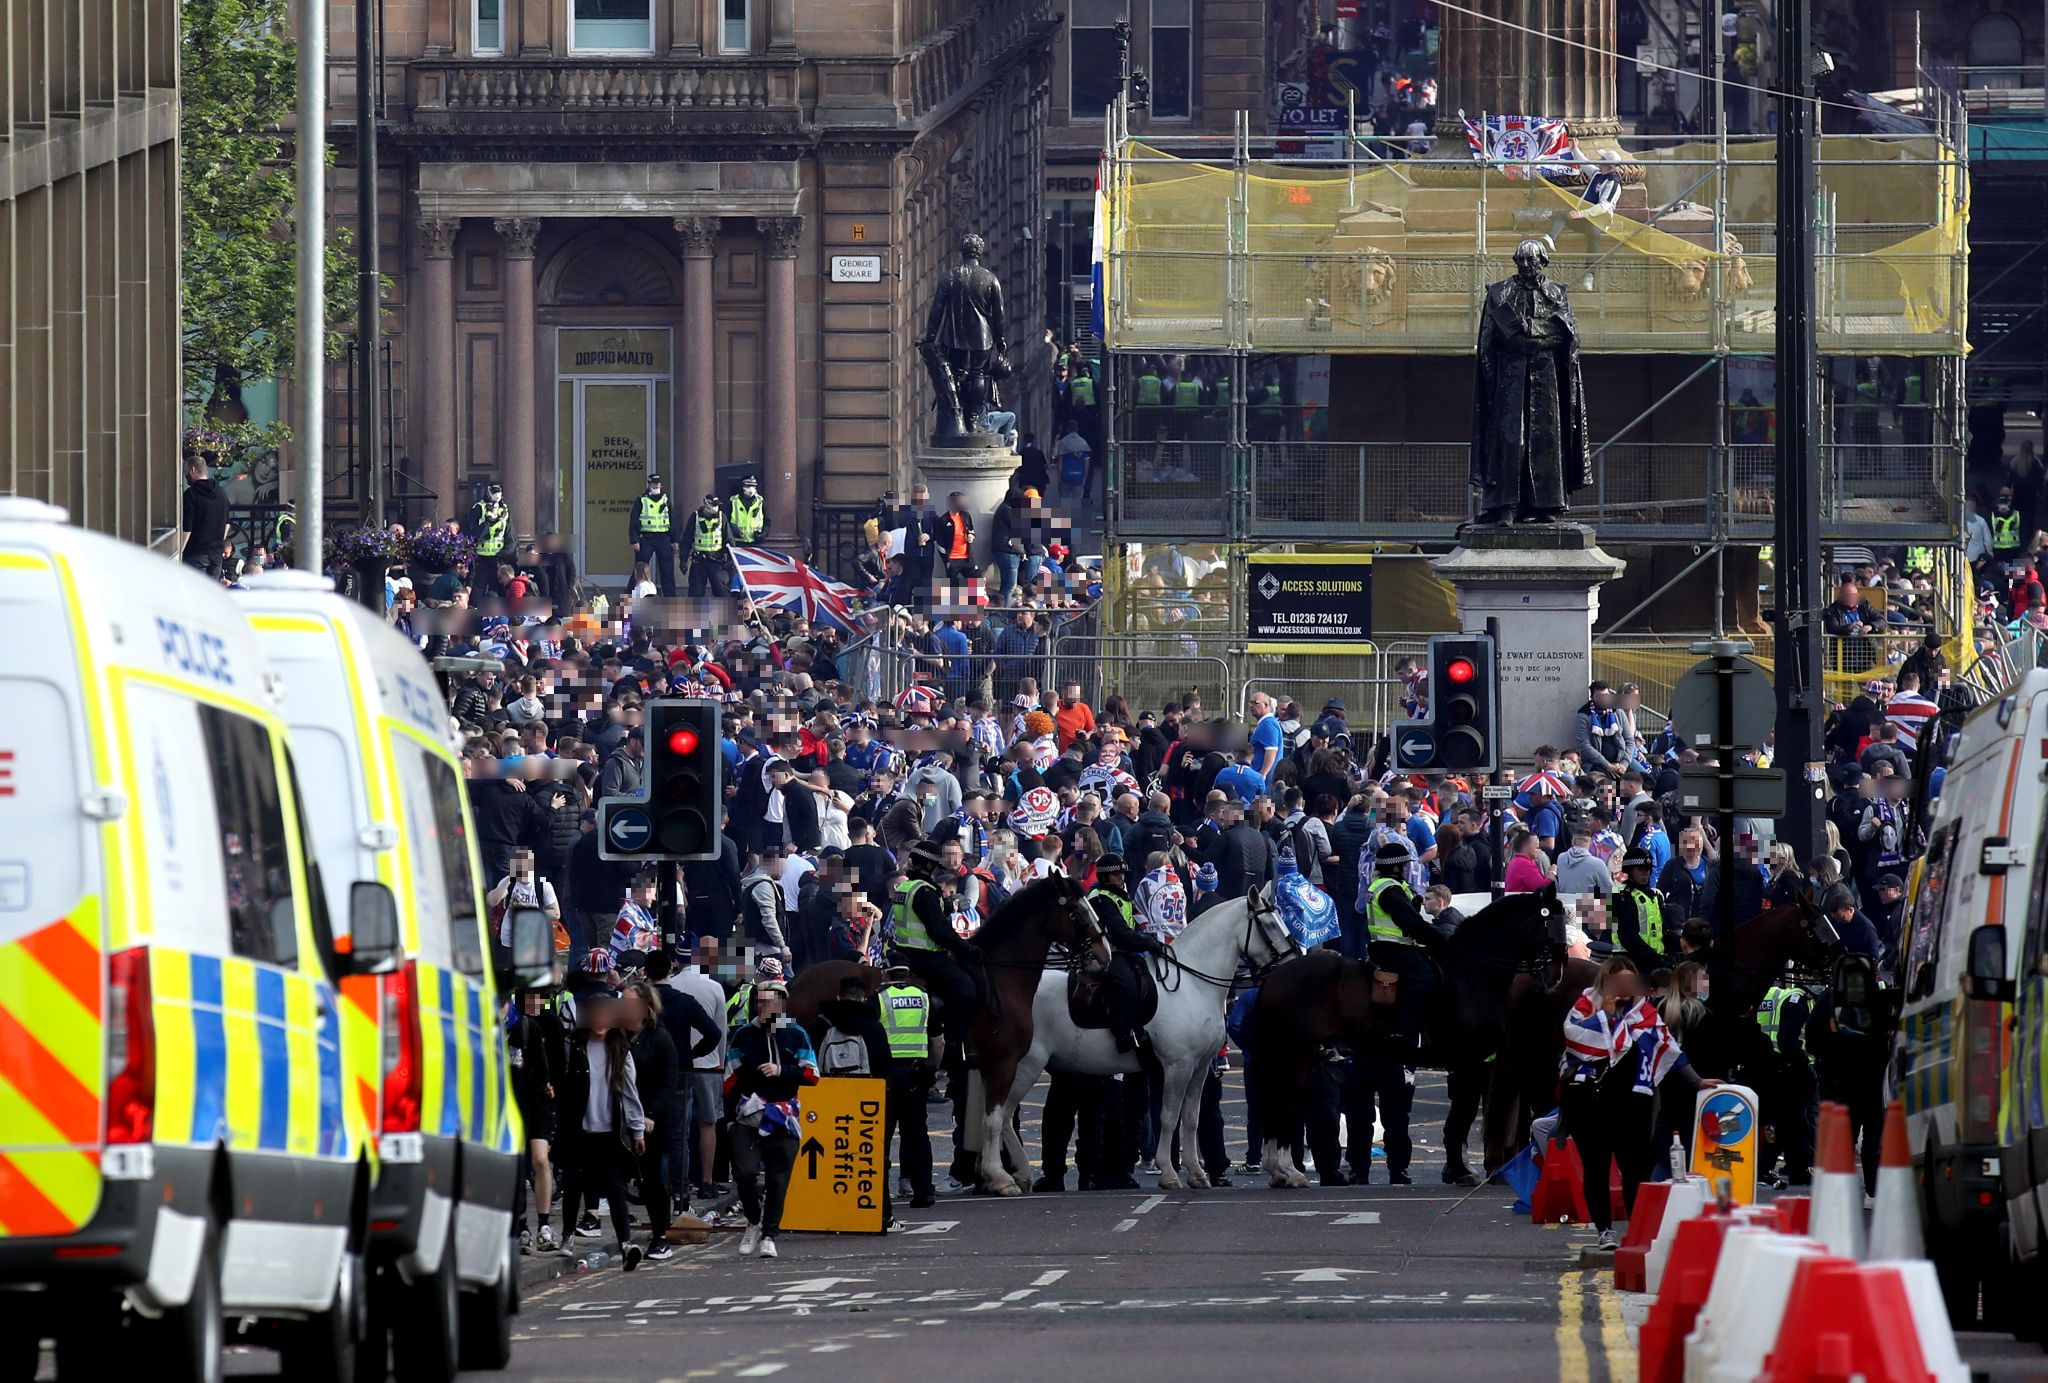 Yob involved in mass brawl at Rangers title celebrations in Glasgow avoids jail